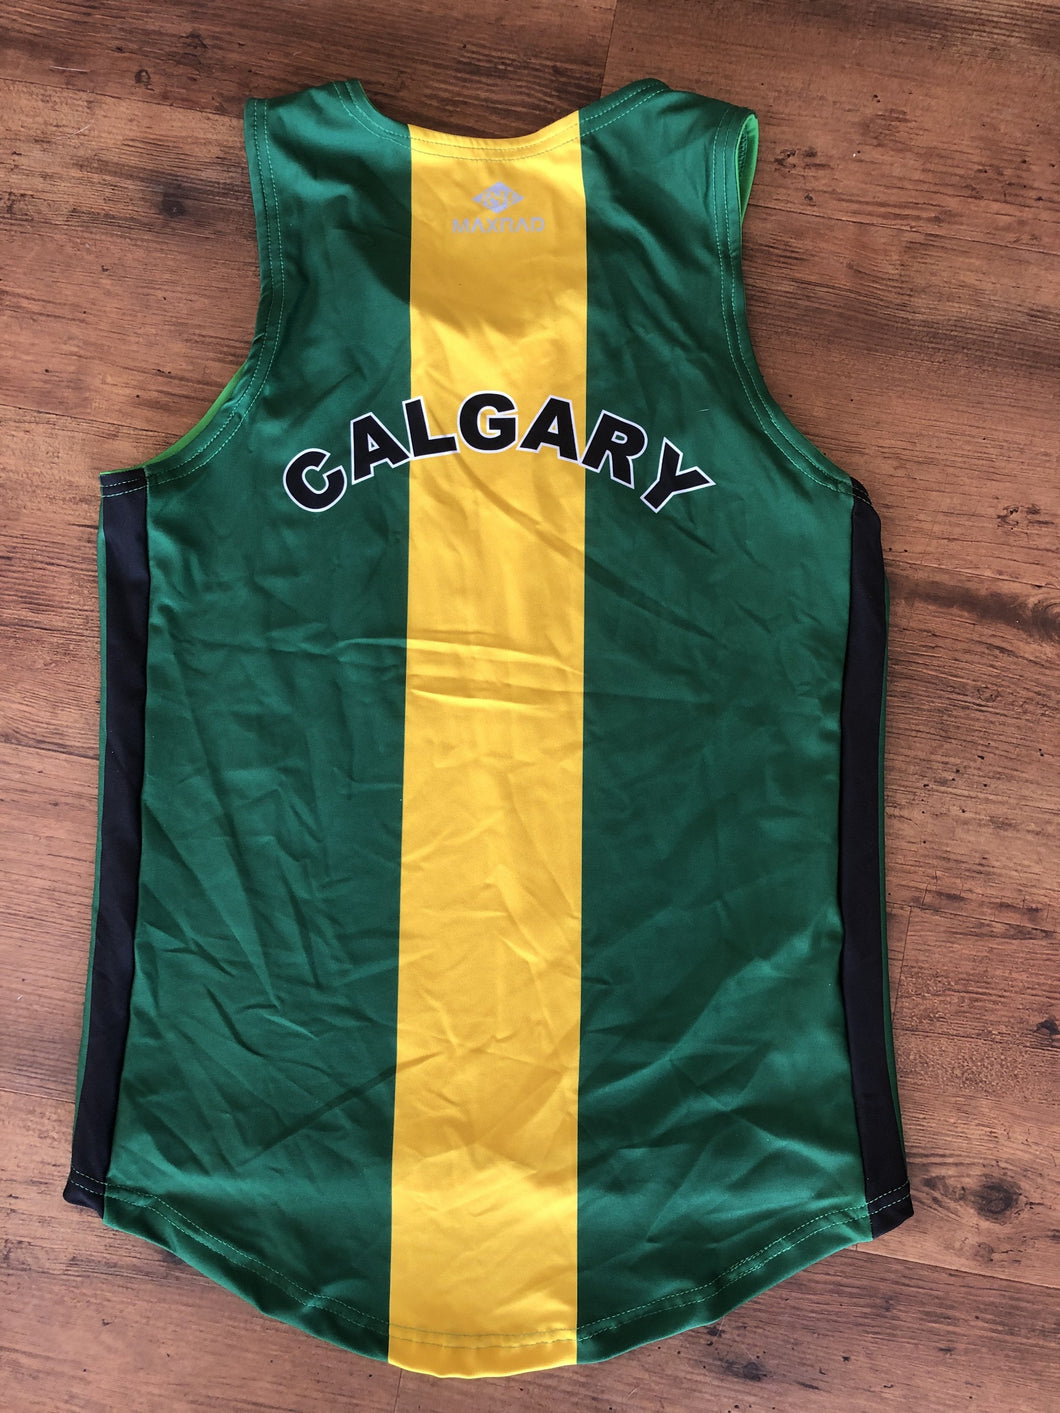 Unisex Tank top - Used in good condition